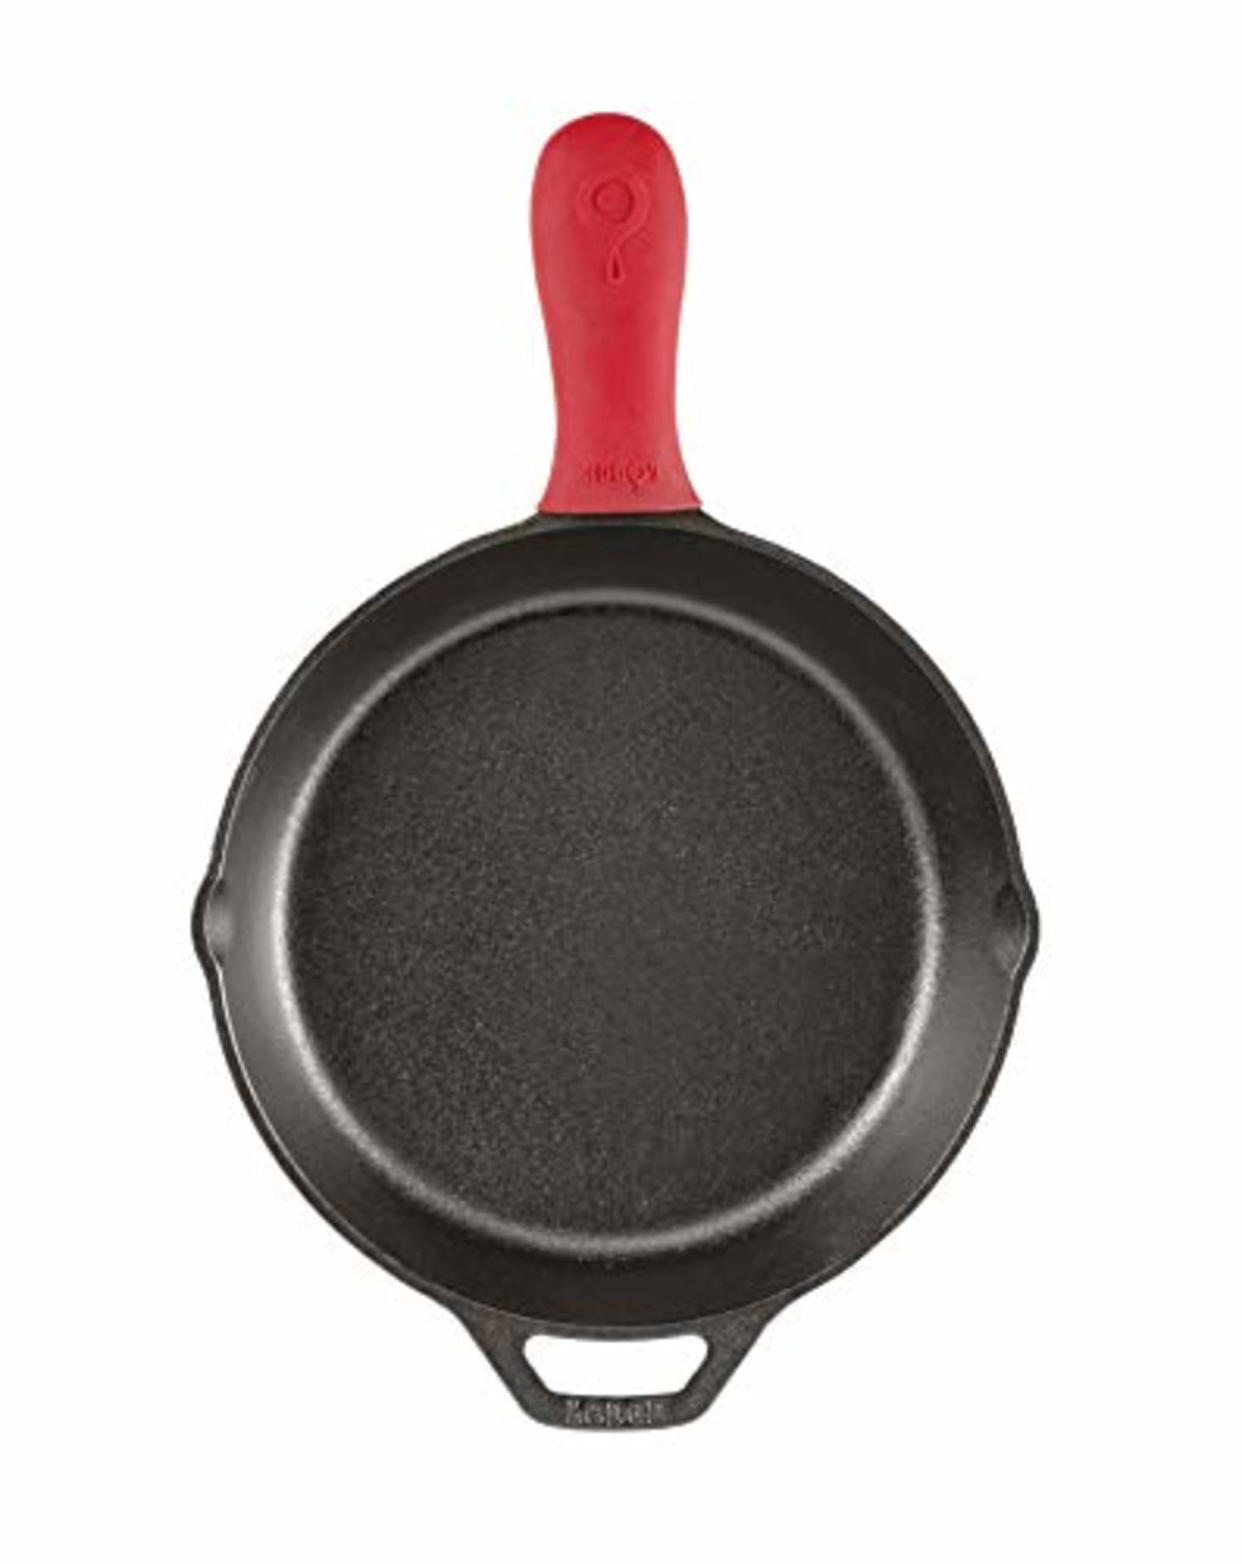 Lodge Cast Iron Skillet with Red Silicone Hot Handle Holder, 10.25-inch (AMAZON)